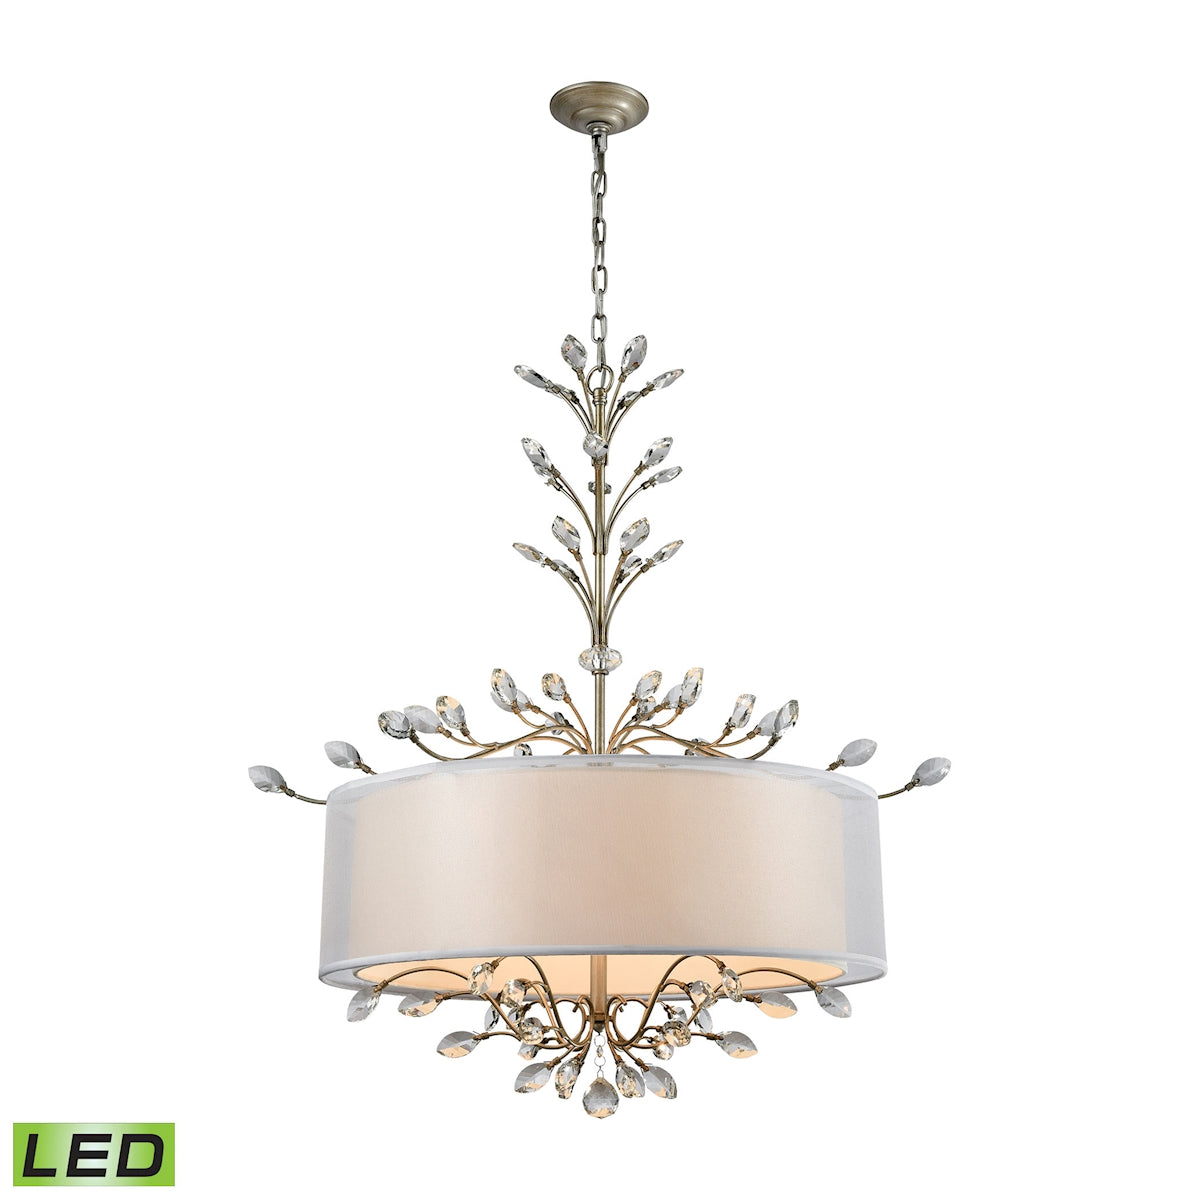 ELK Lighting 16283/6-LED Asbury 6-Light Chandelier in Aged Silver with Organza and White Fabric Shade - Includes LED Bulbs